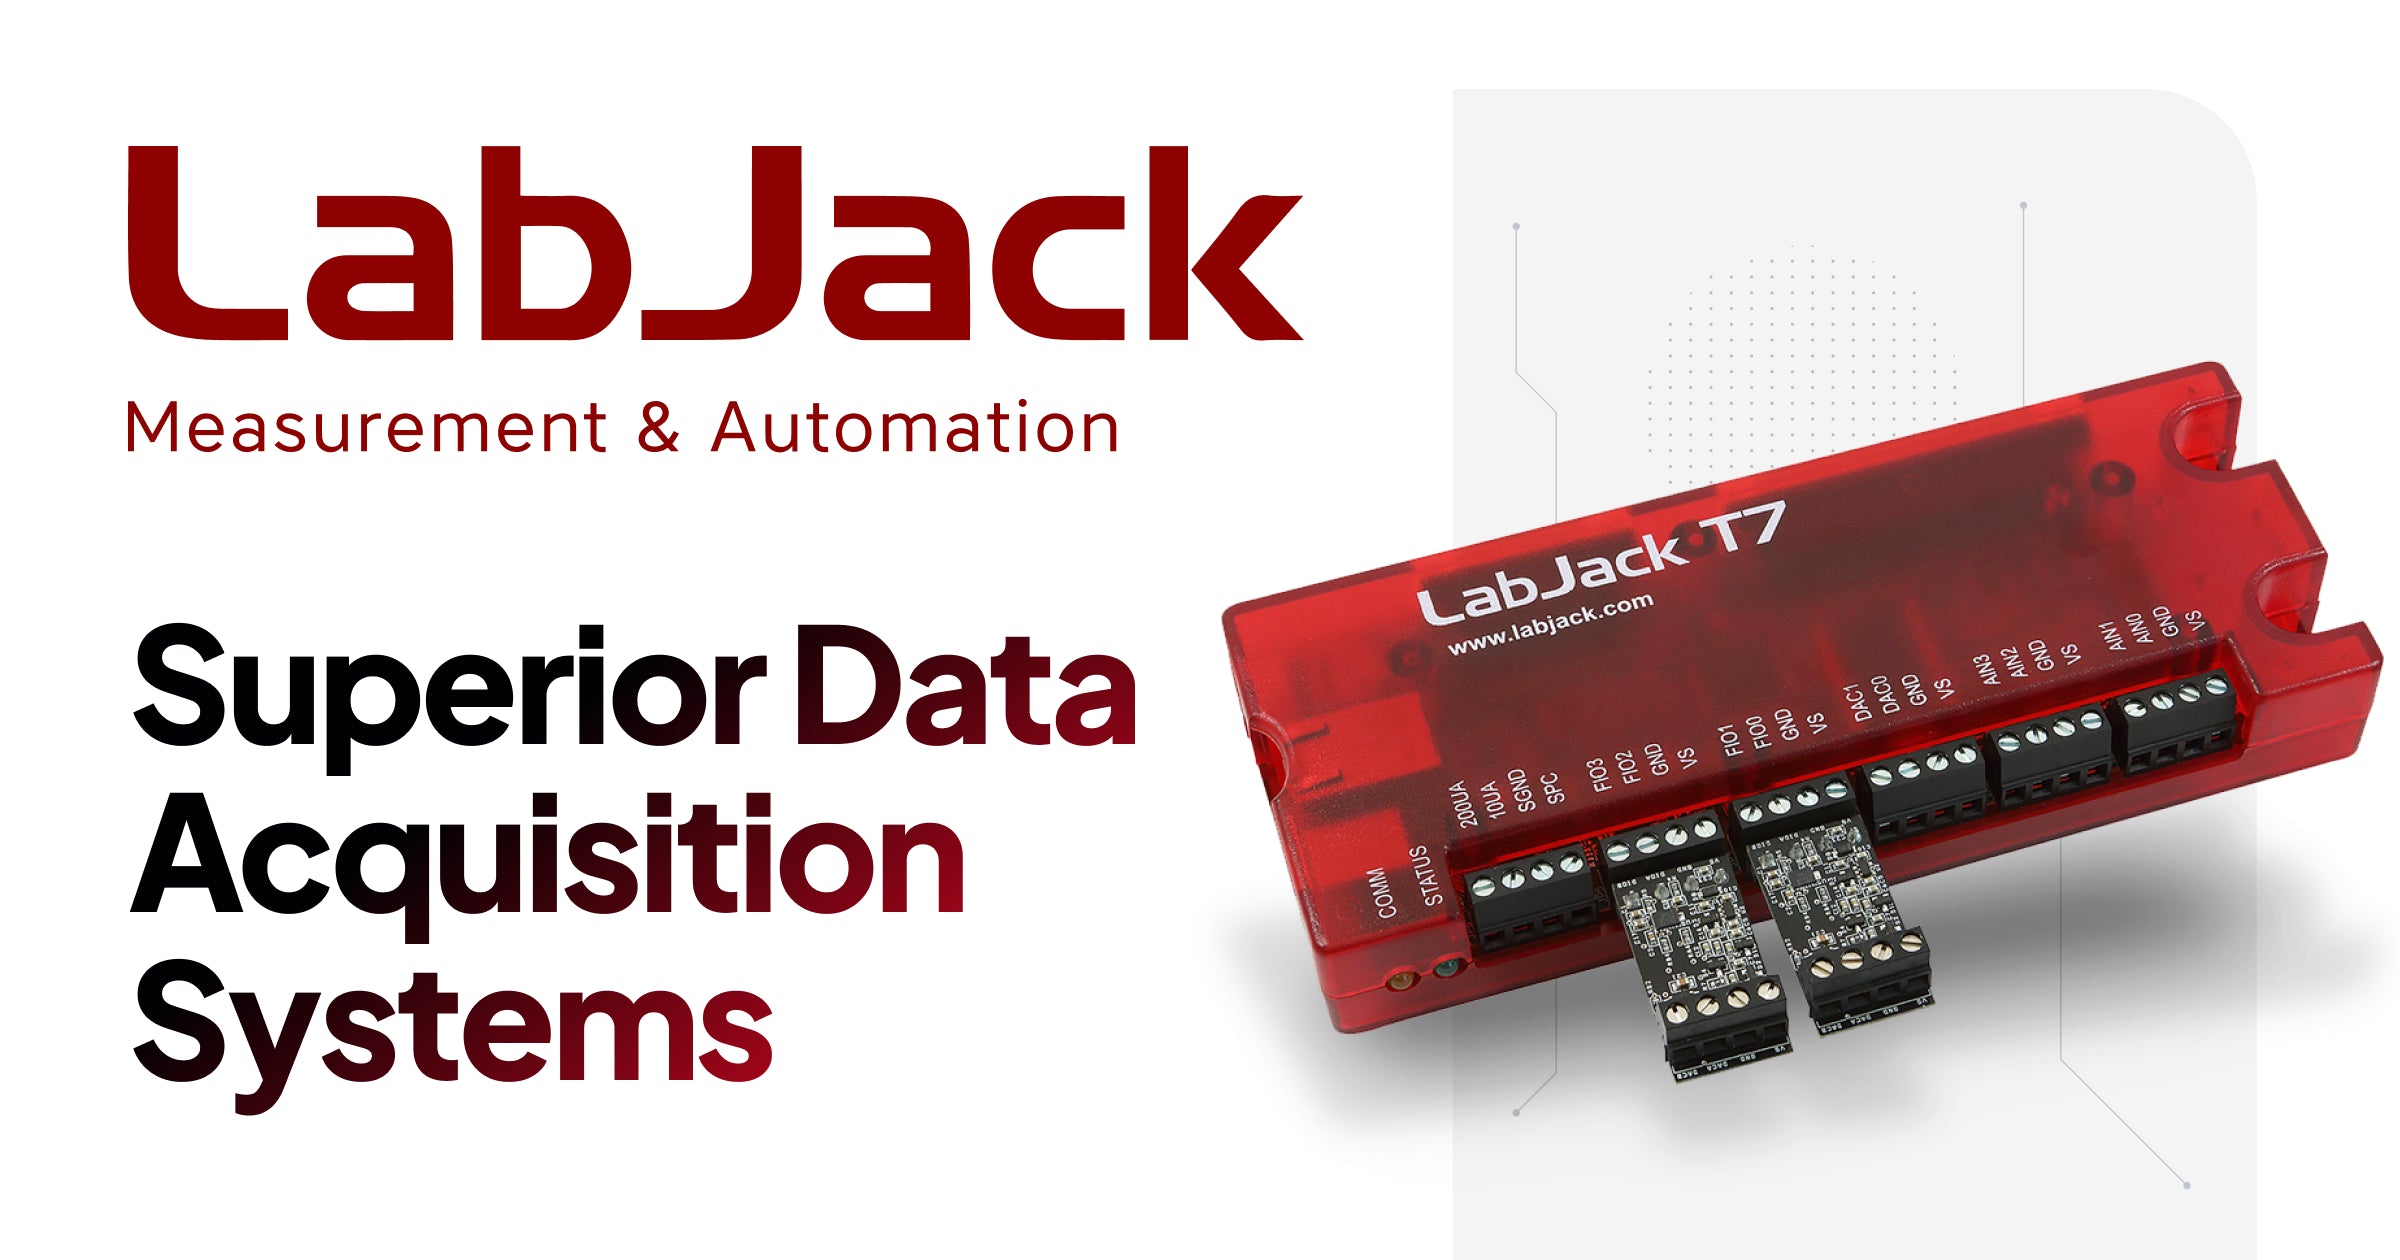 LabJack U3-LV (Low Voltage) USB DAQ Device with 16 Flexible I/O for Analog 0-2.4volts Signals and Digital Data Acquisition of Sensors